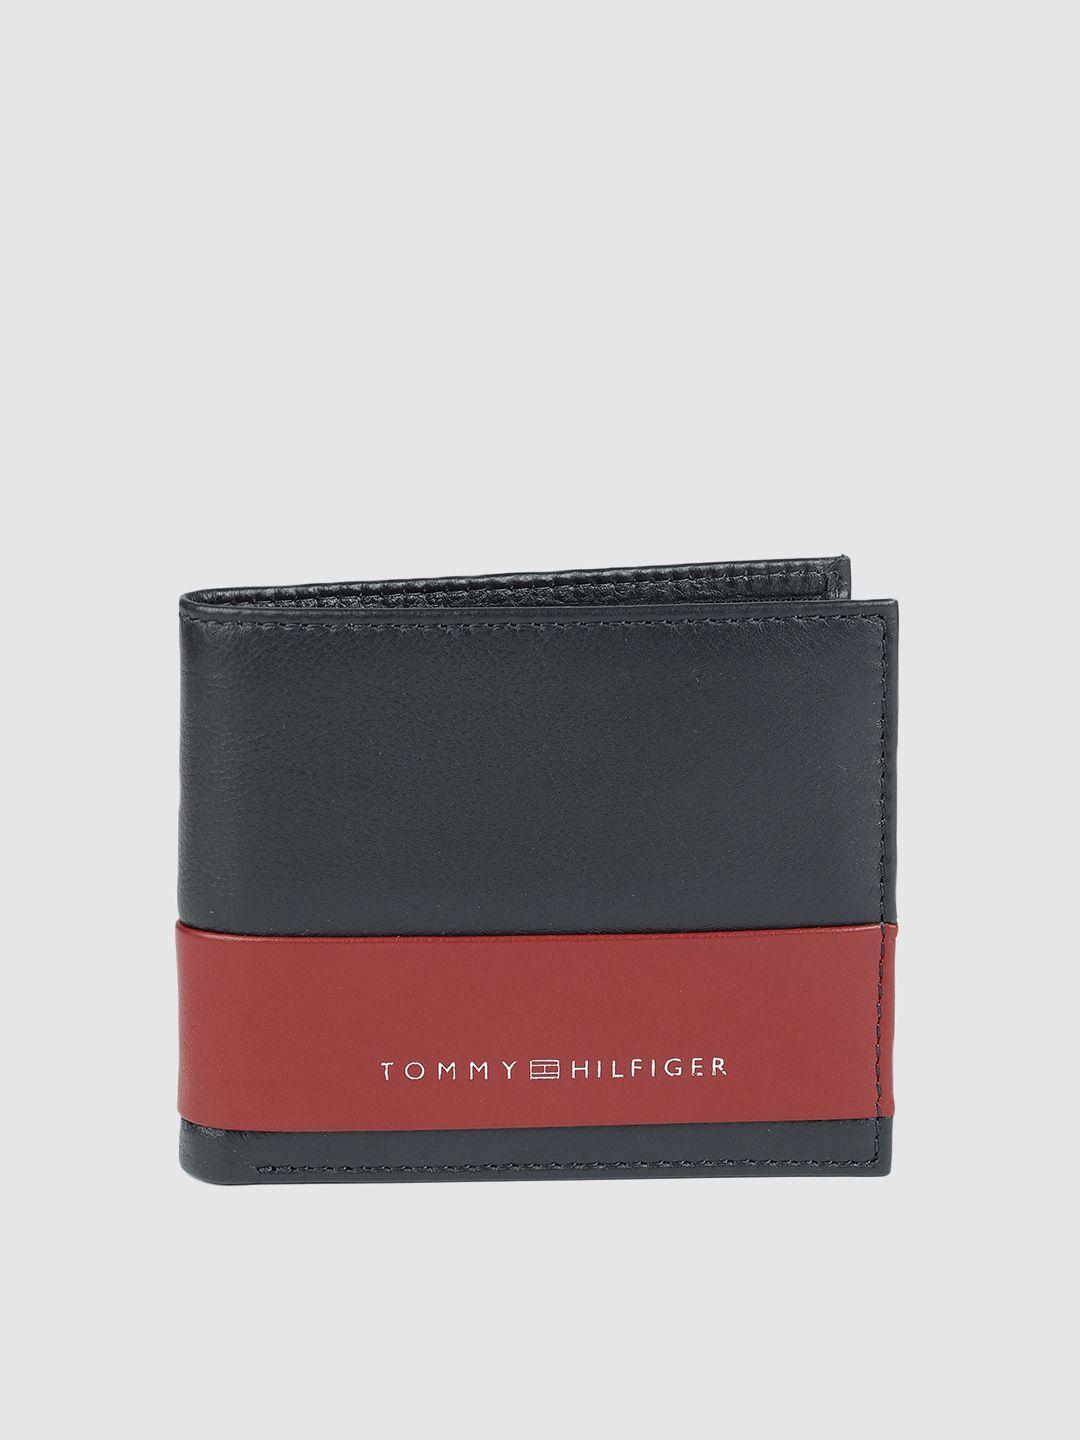 tommy hilfiger men navy blue & red colourblocked leather two fold wallet